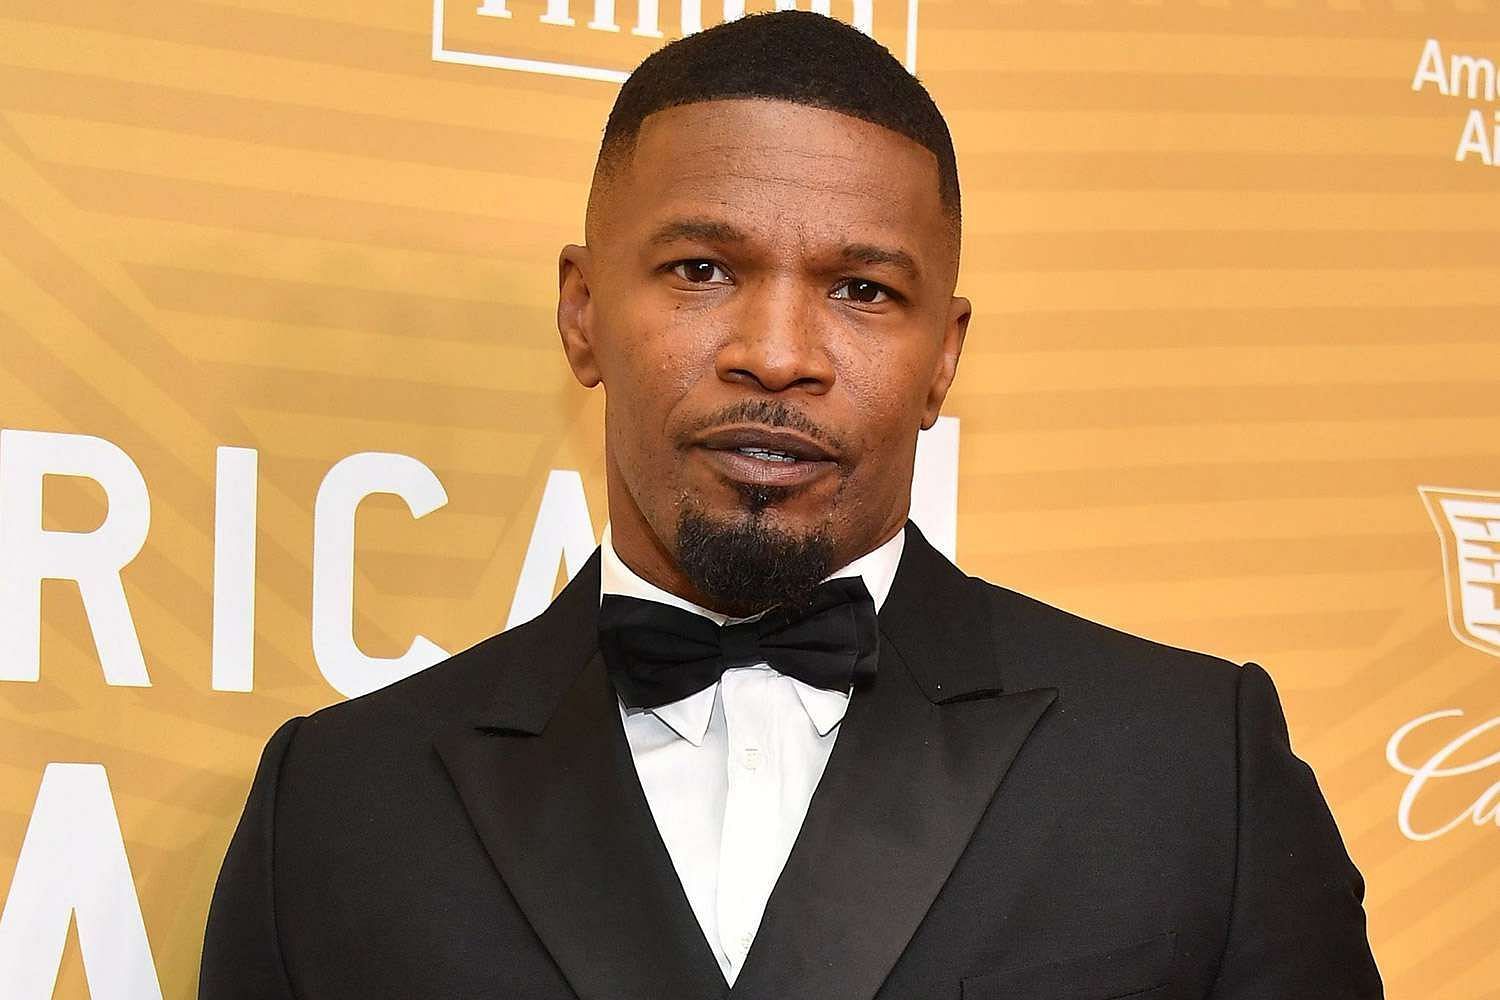 Jamie Foxx recently opened up about his health following a crisis earlier this year (Image via Amy Sussman/Getty)